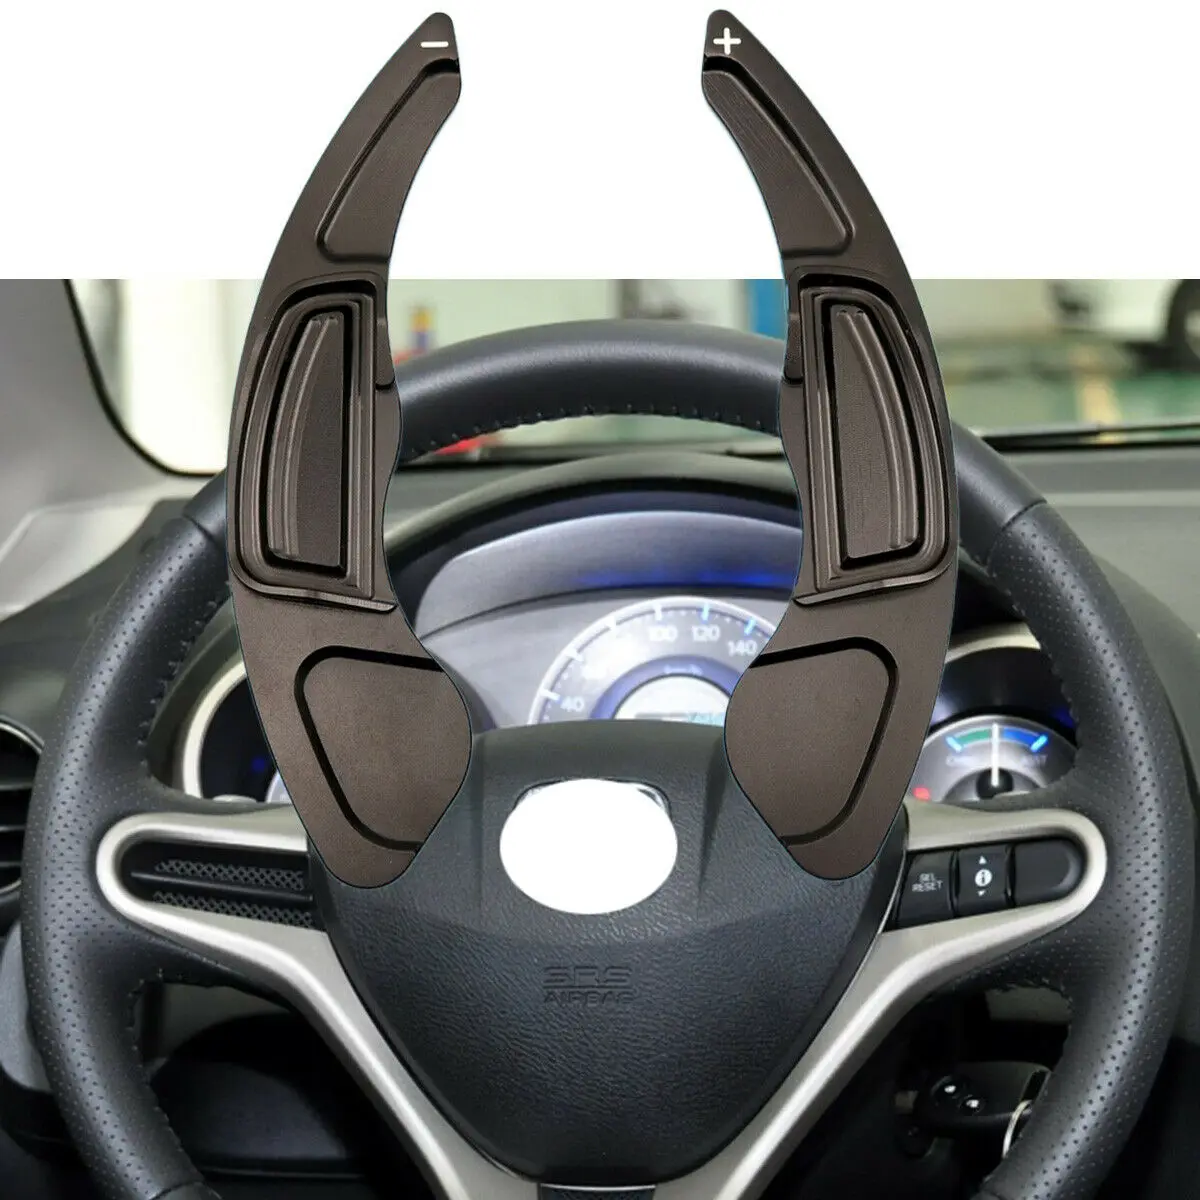 Steering Wheel Shift Paddle Shifter Cover Guard Fit Lexus ES300h ES350 2019-2020 